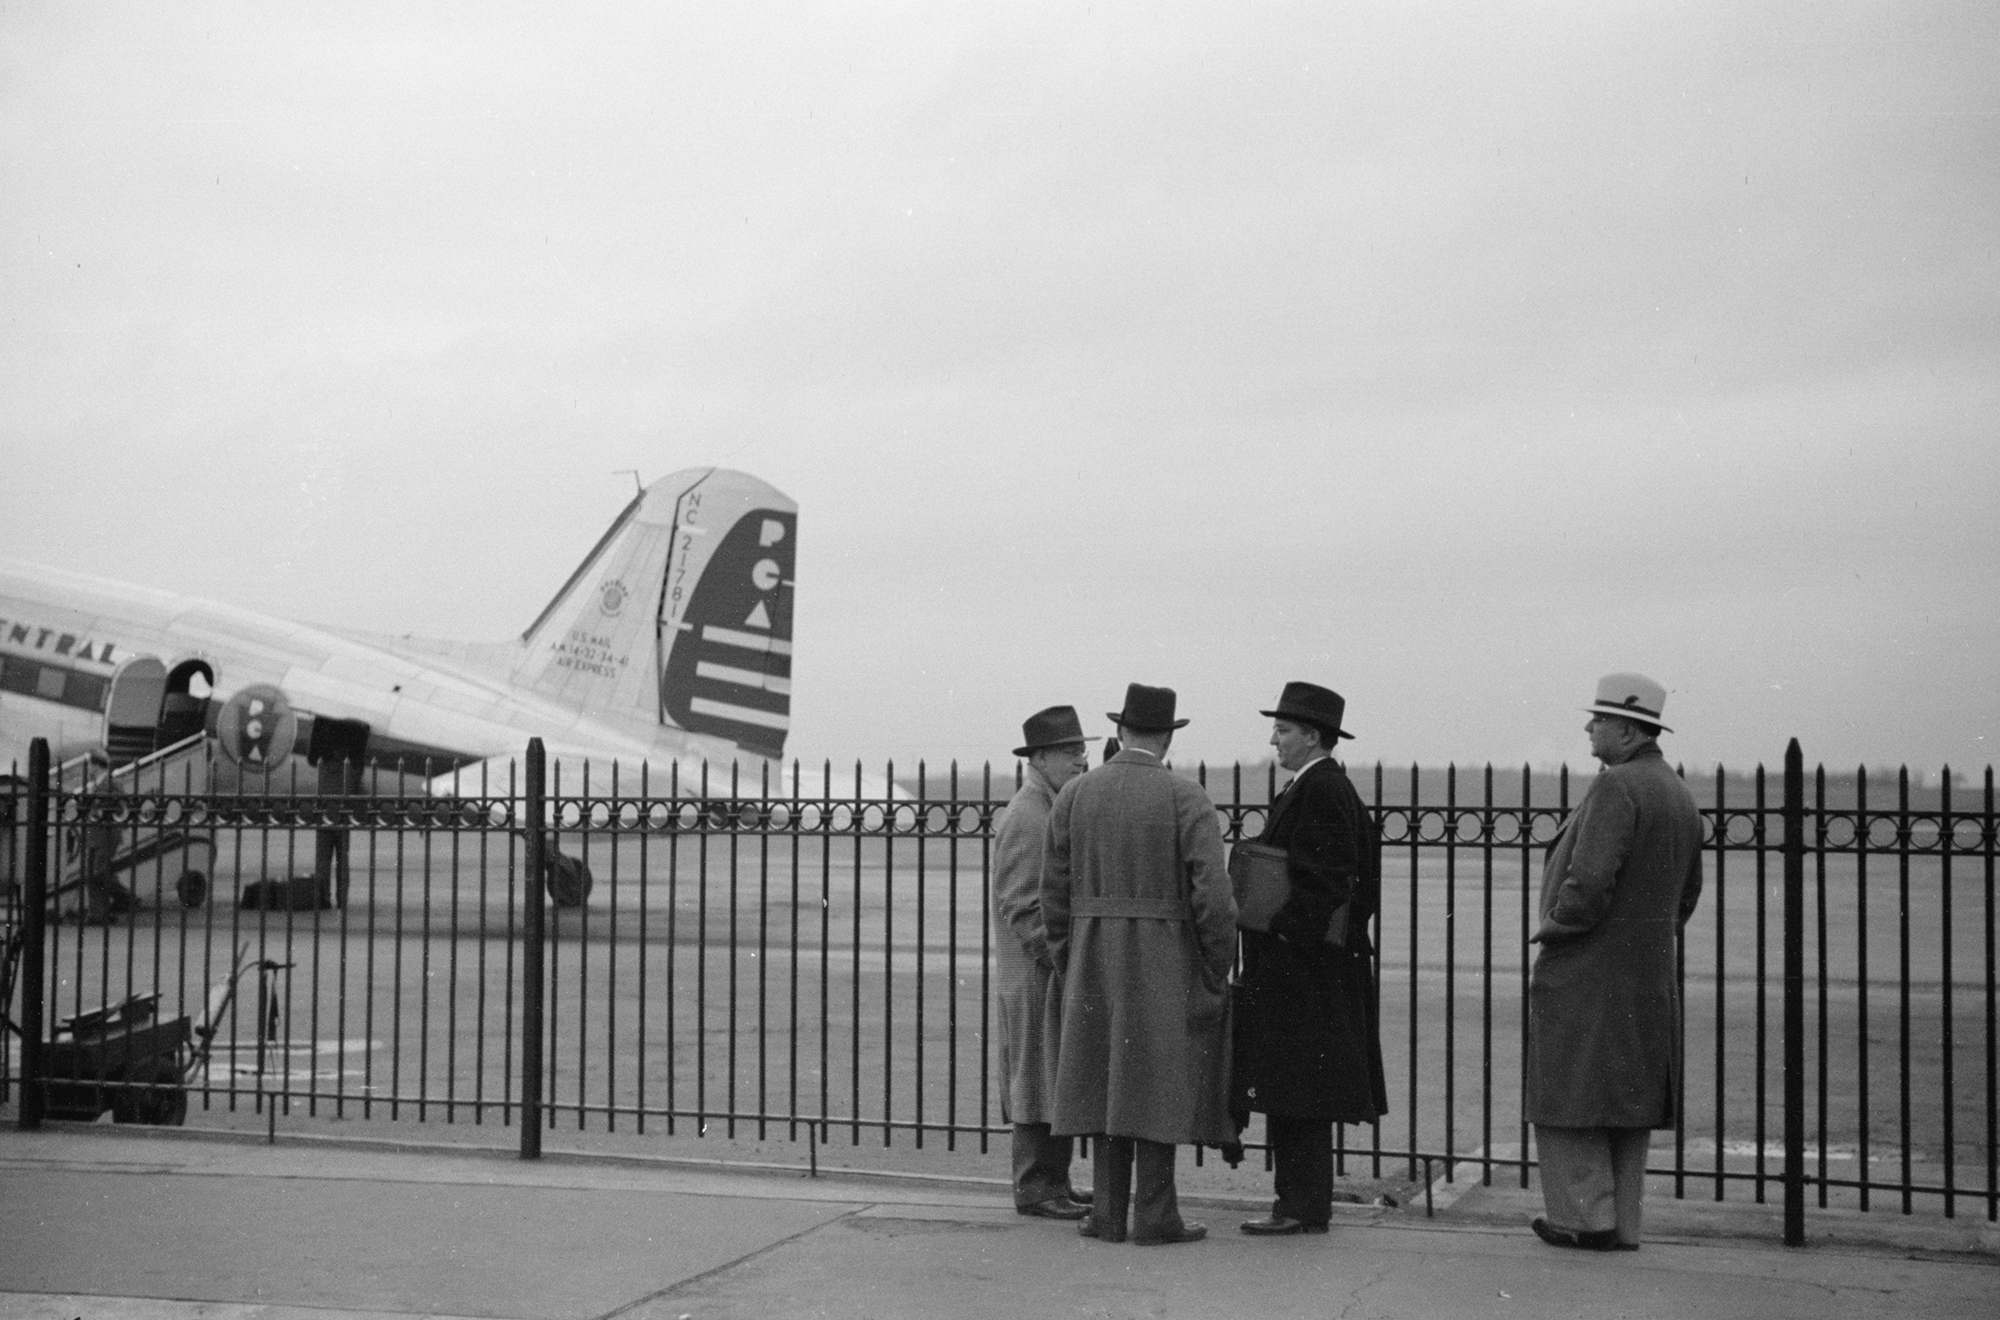 four men wait for a plane to land on the tarmac